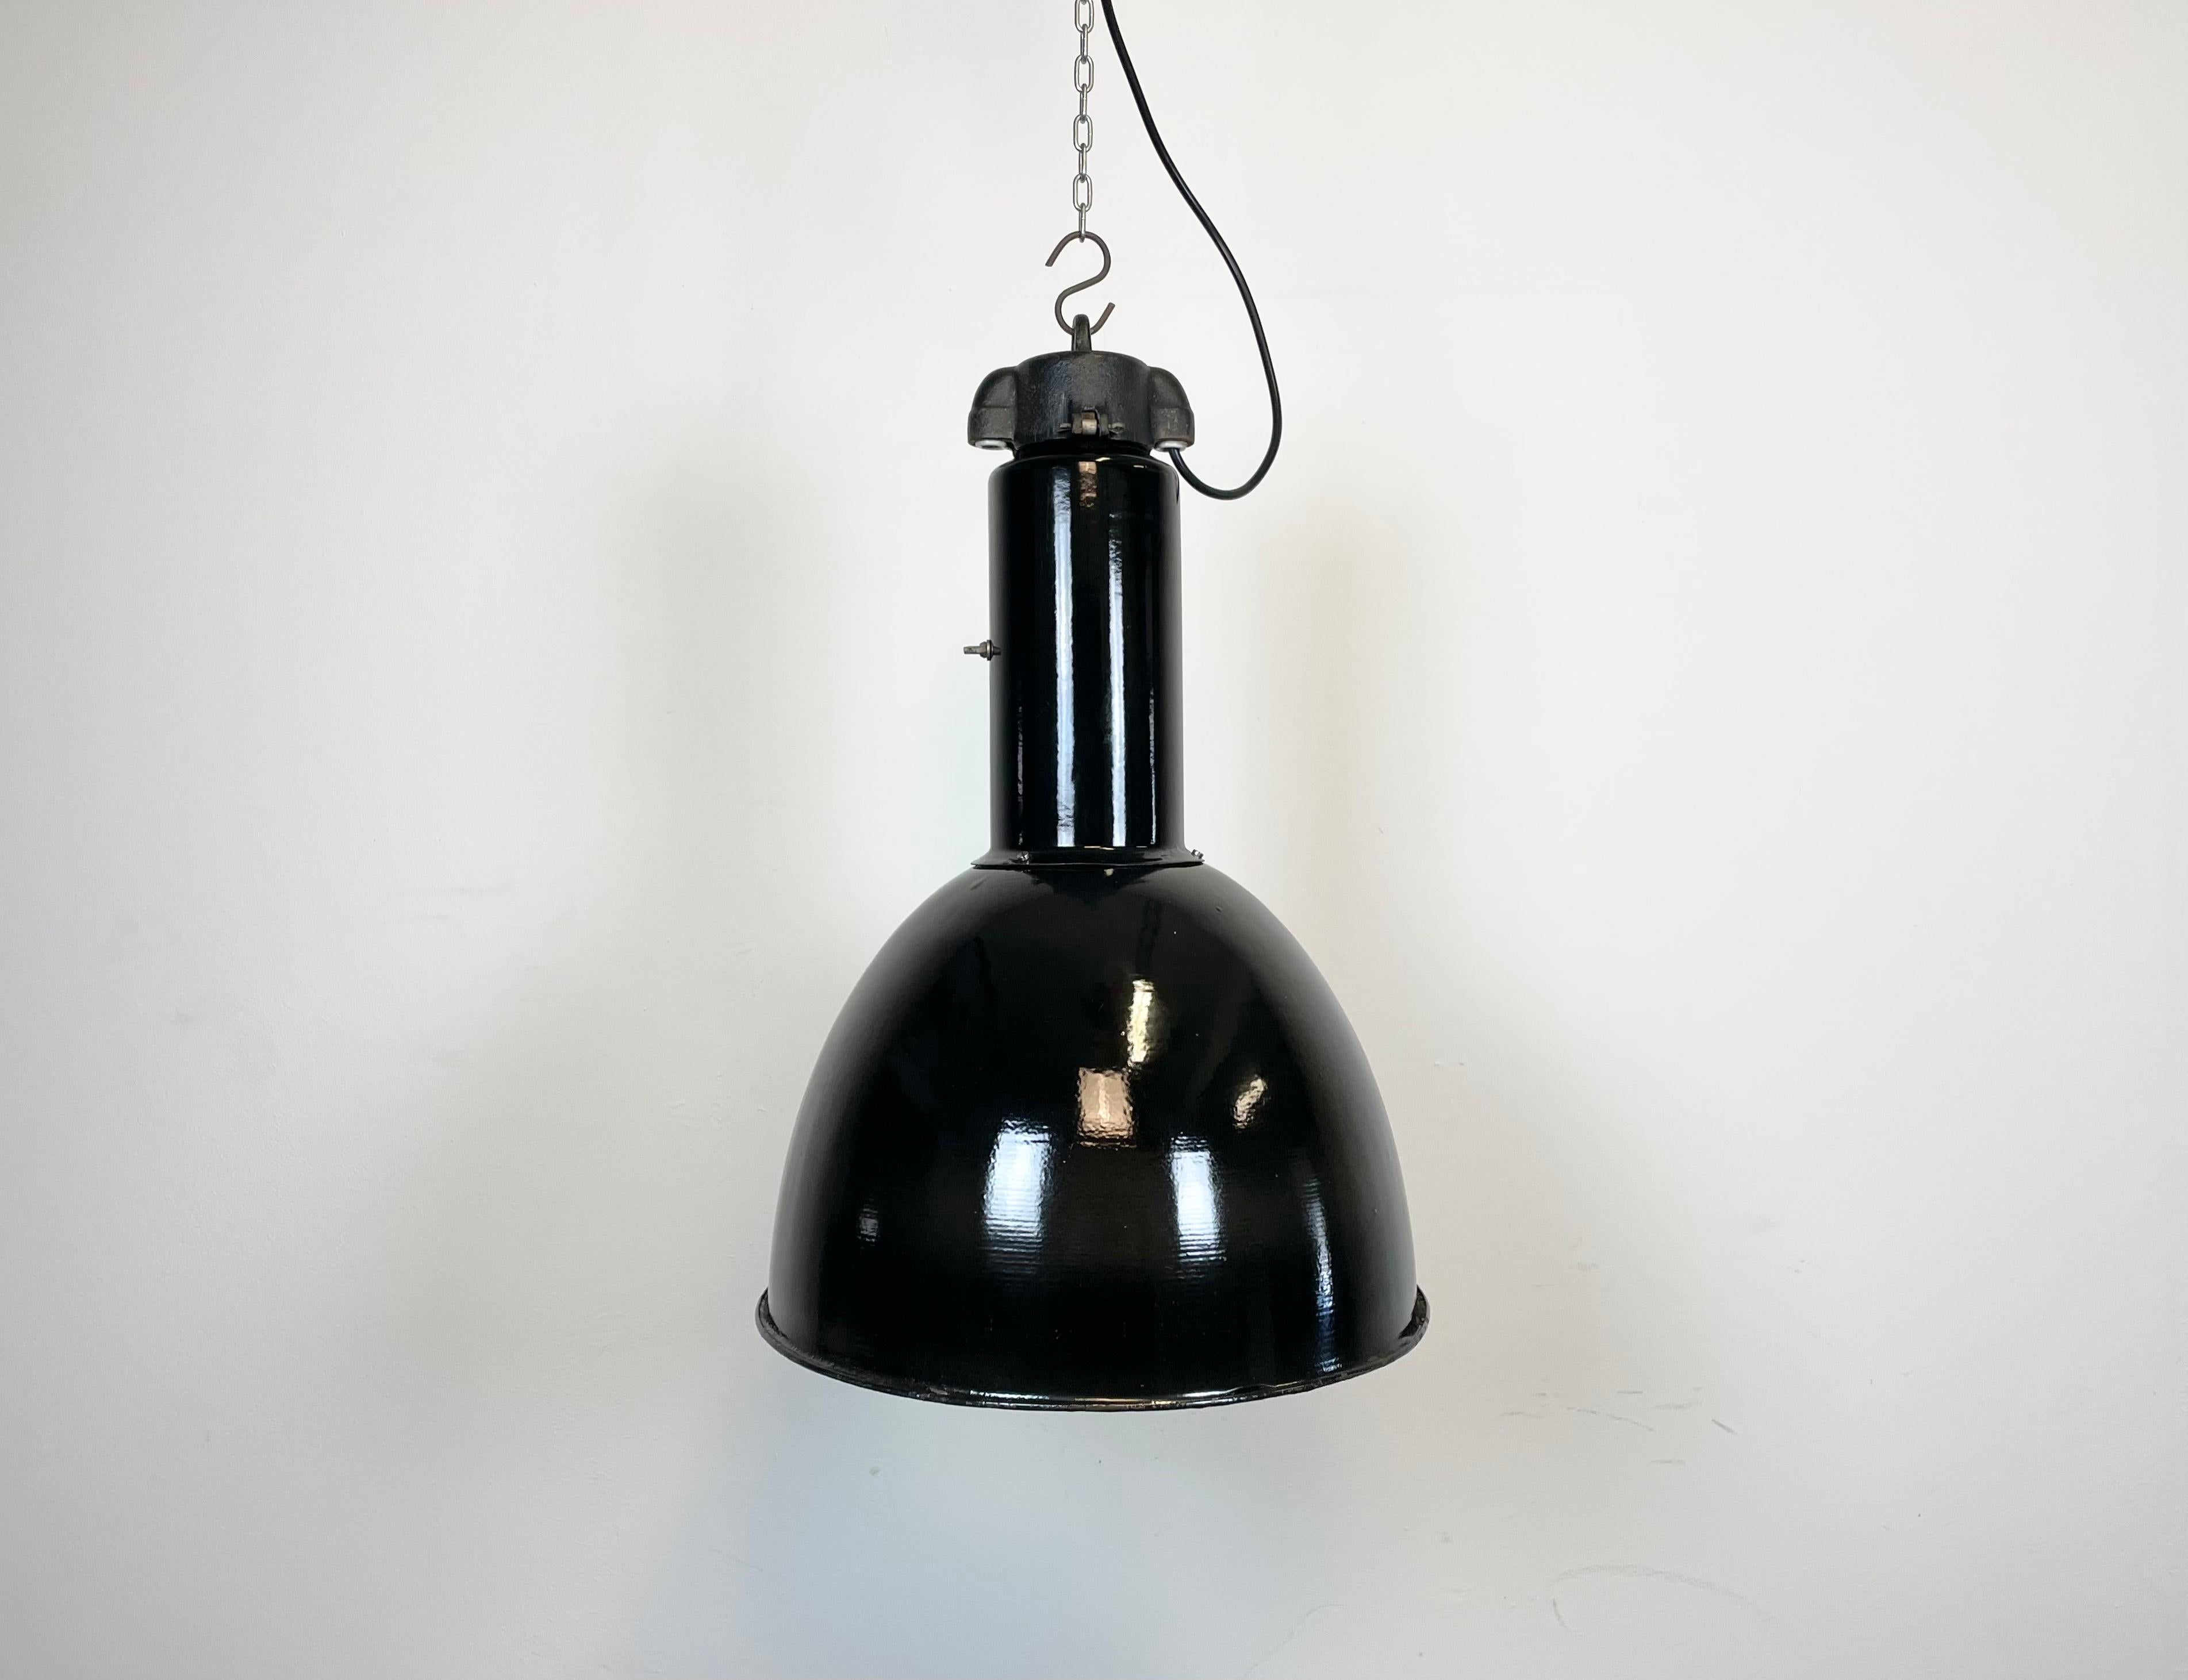 Industrial black enamel pendant lamp made by Elektrosvit in former Czechoslovakia during the 1930s -1970s. Designed in the period of Bauhaus. White enamel inside the shade. Cast iron top. New porcelain socket requires standard  E 27/ E 26